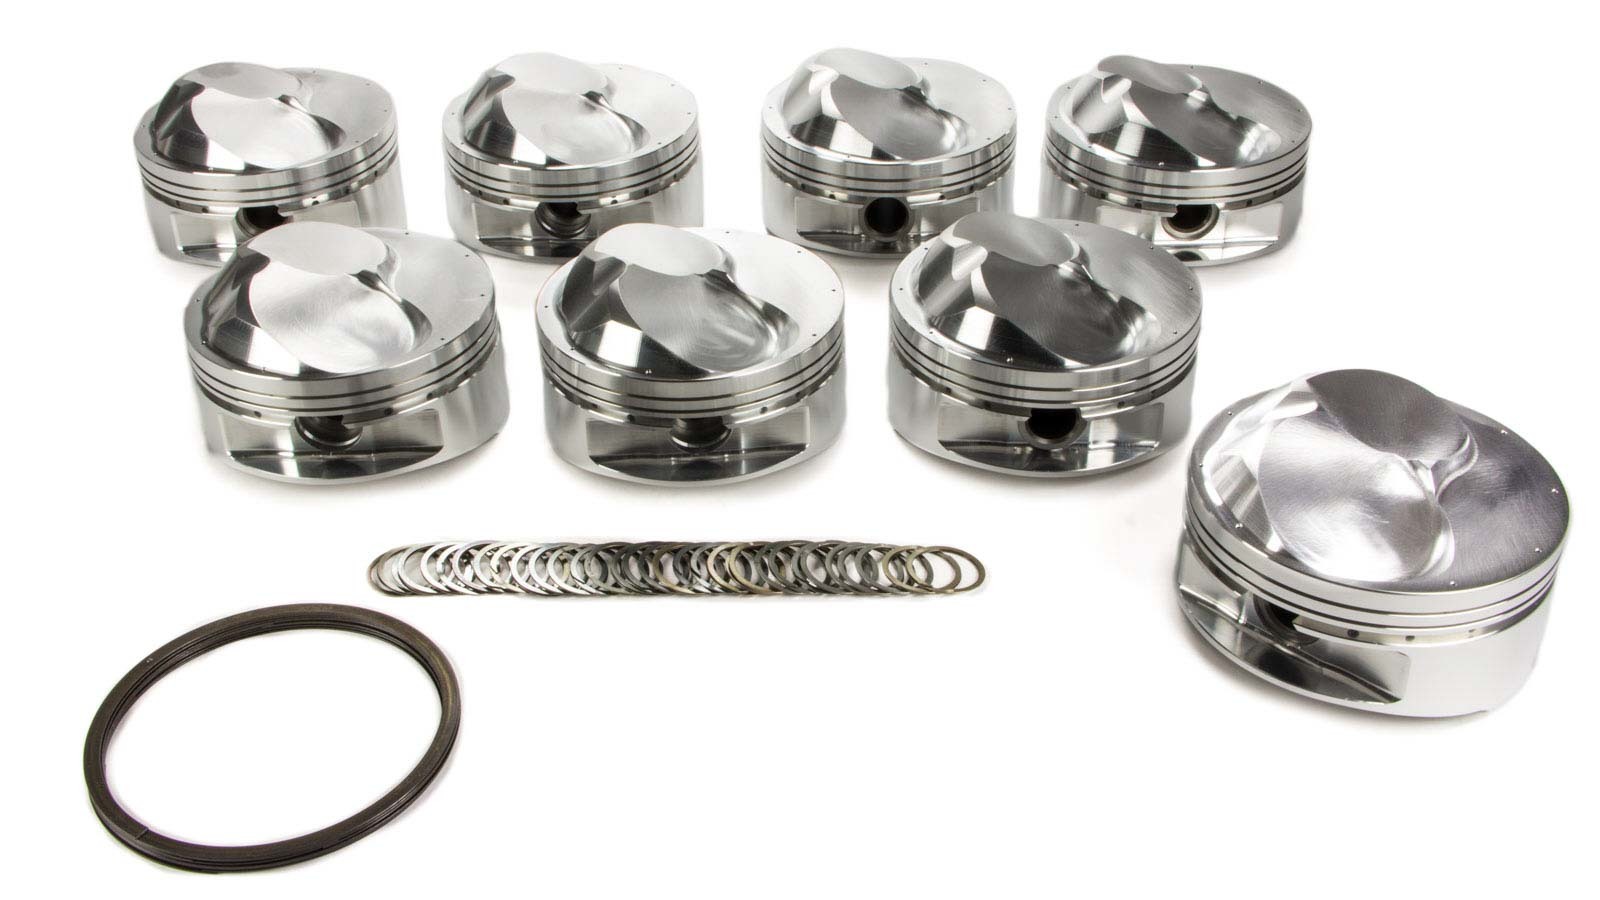 JE Pistons 243332 Piston, Big Block Dome, Forged, 4.610 in Bore, 0.043 x 0.043 x 3 mm Ring Grooves, Plus 46.00 cc, Big Block Chevy, Set of 8